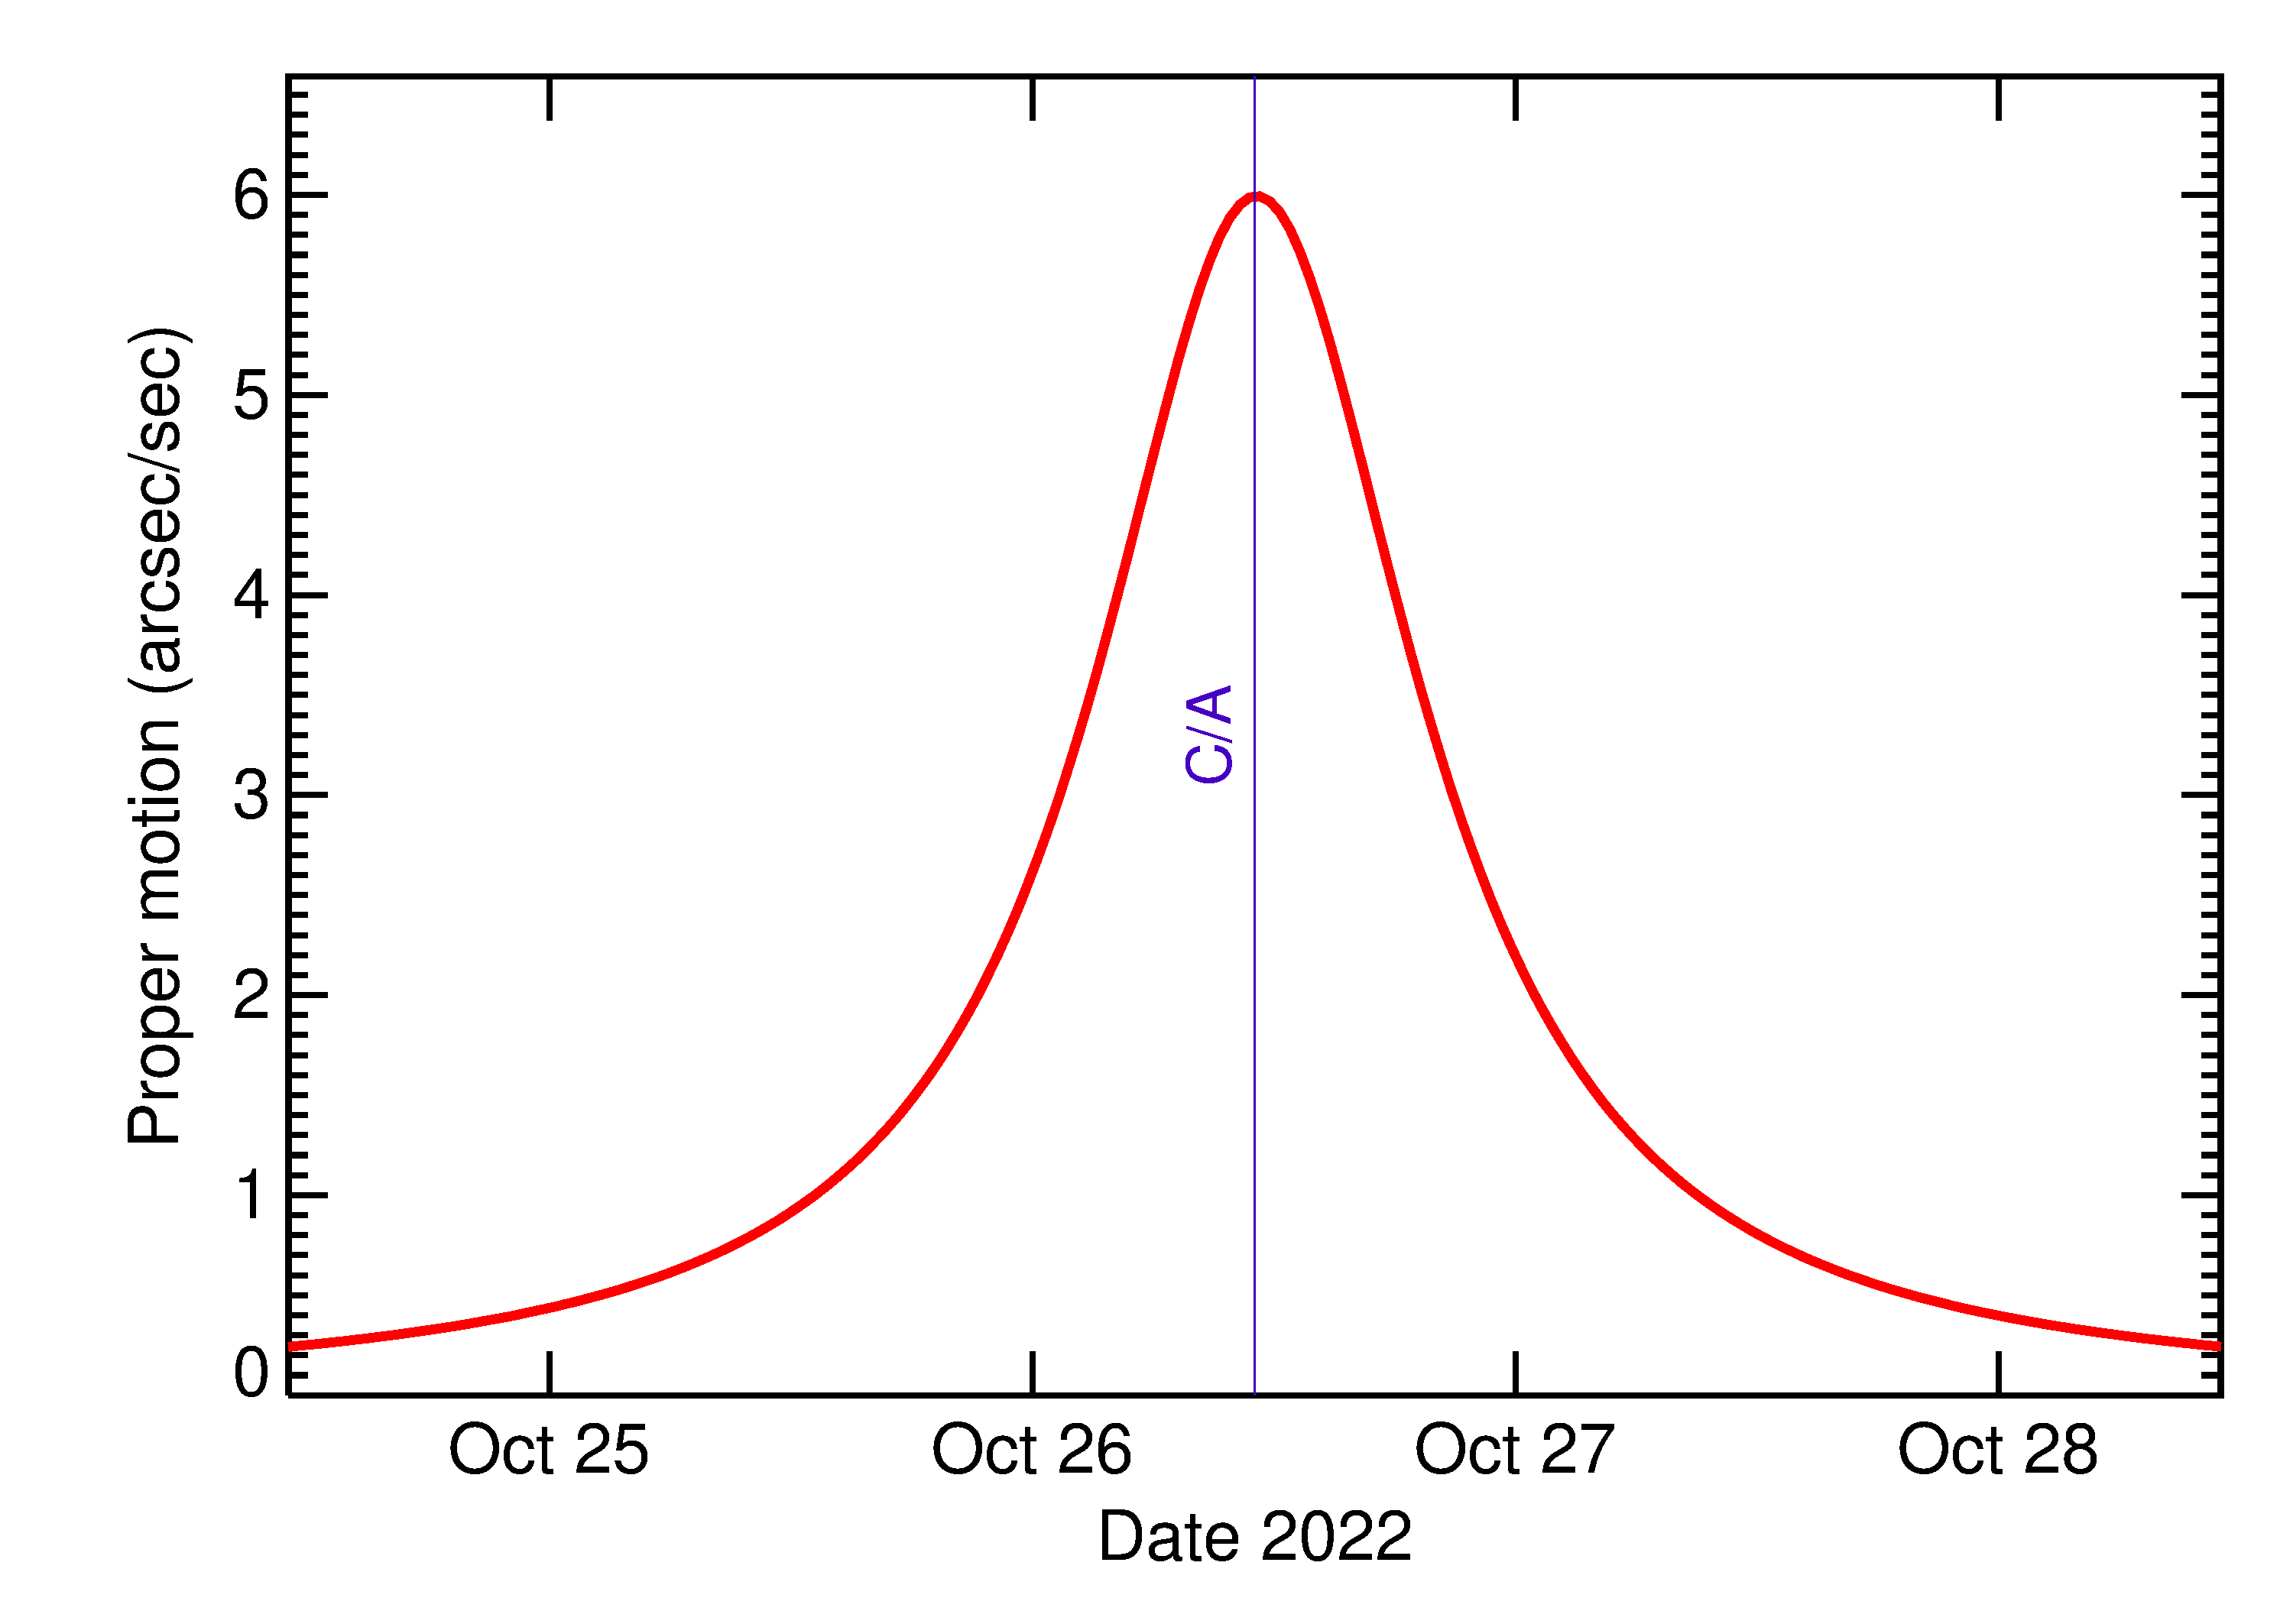 Proper motion rate of 2022 UC14 in the days around closest approach